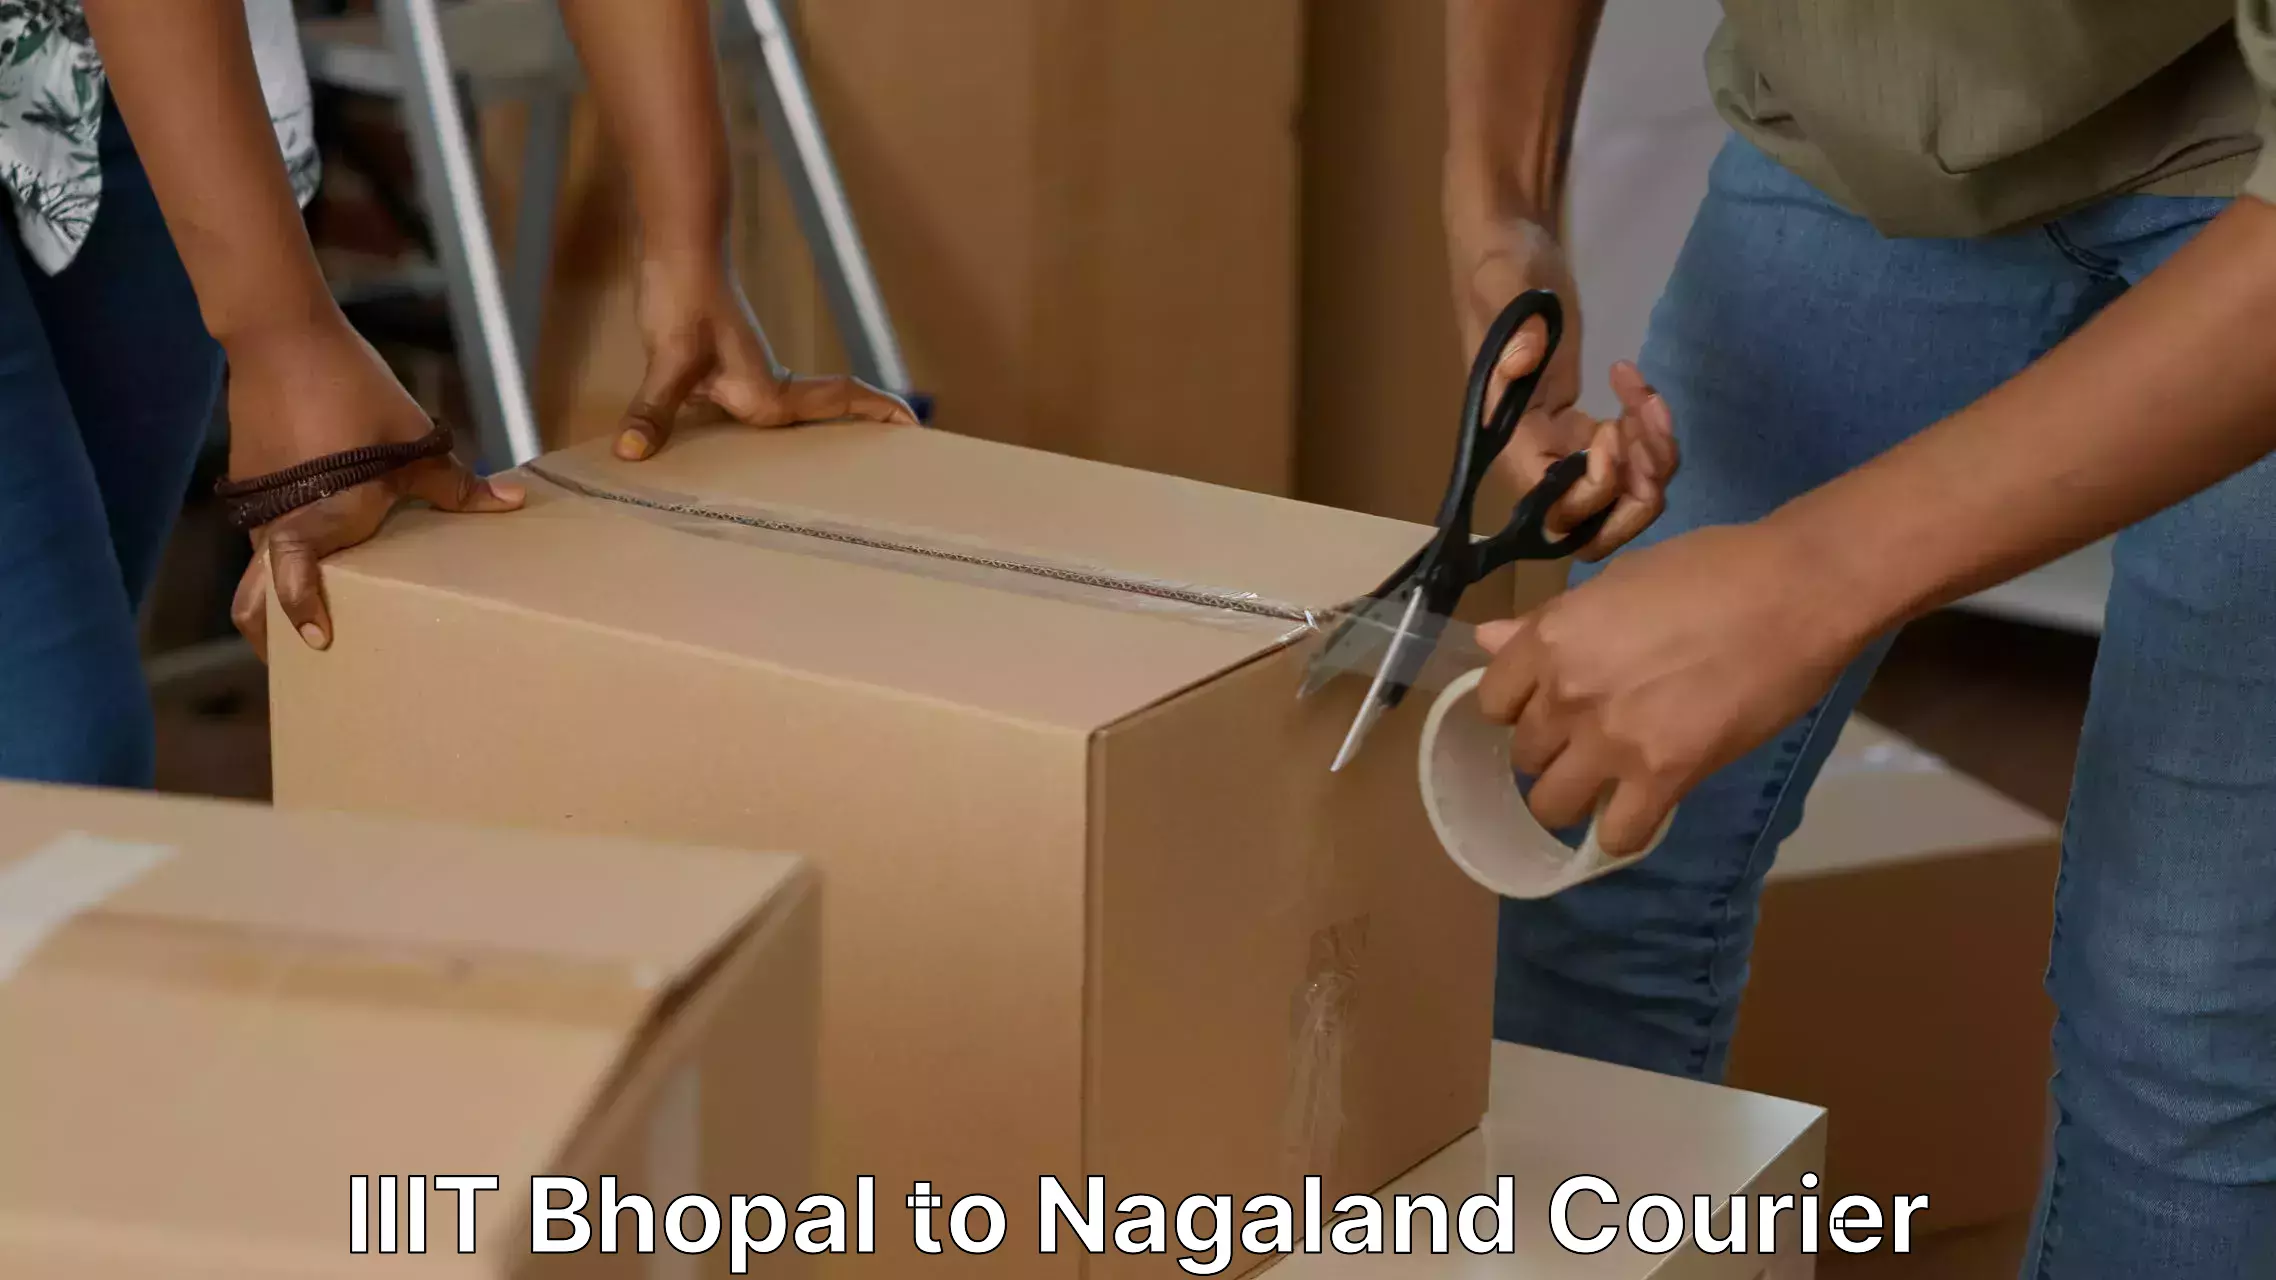 Trusted moving company IIIT Bhopal to Nagaland